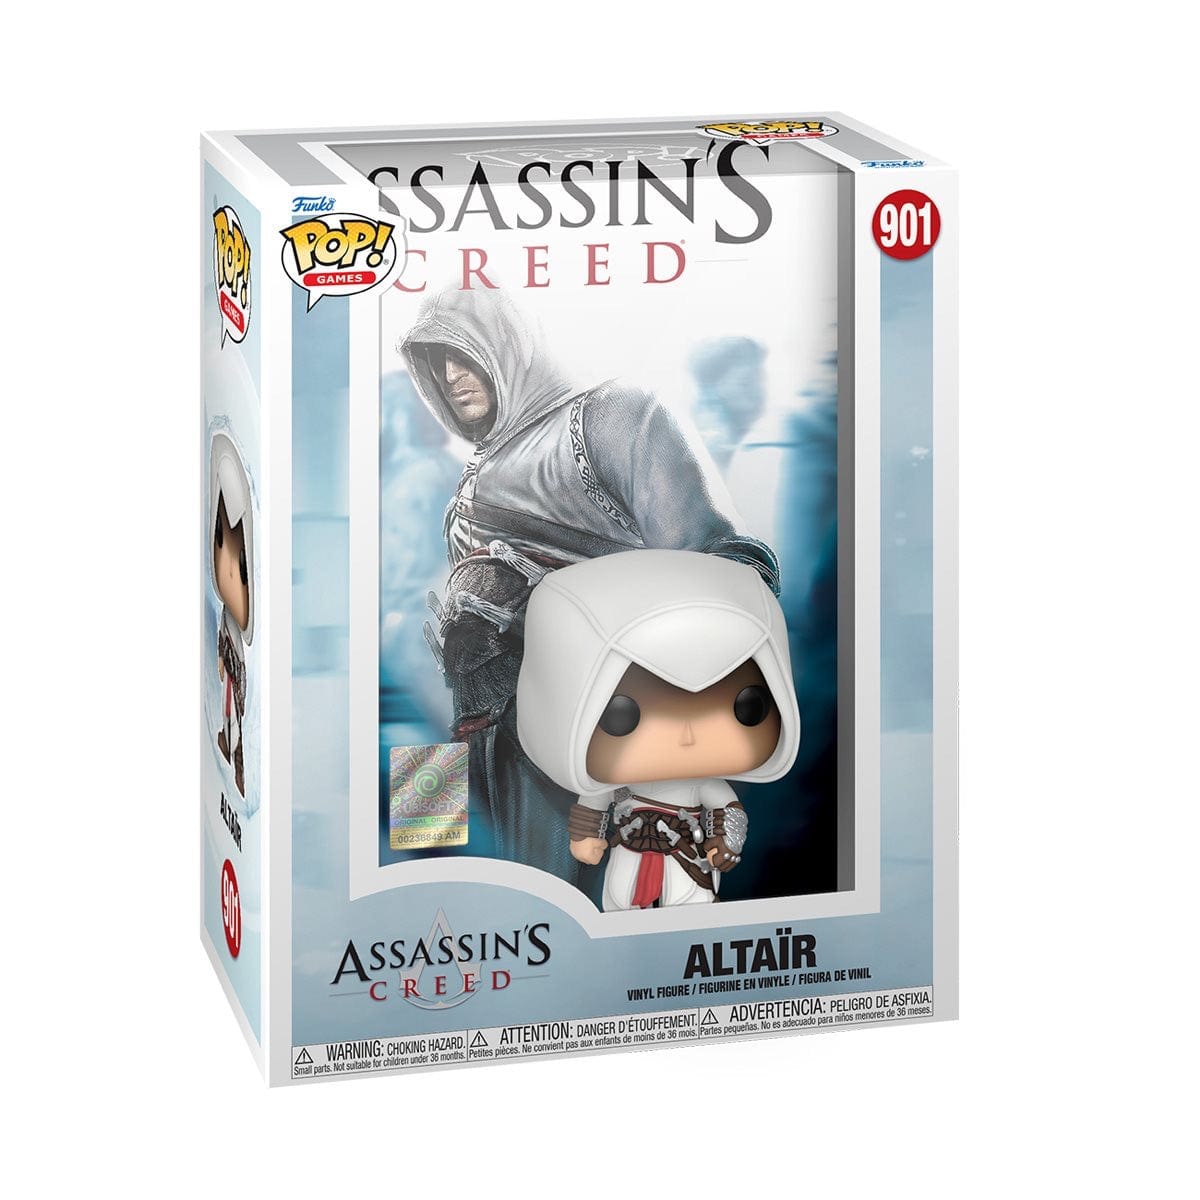 Assassin's Creed Altair Pop! Game Cover Figure with Case